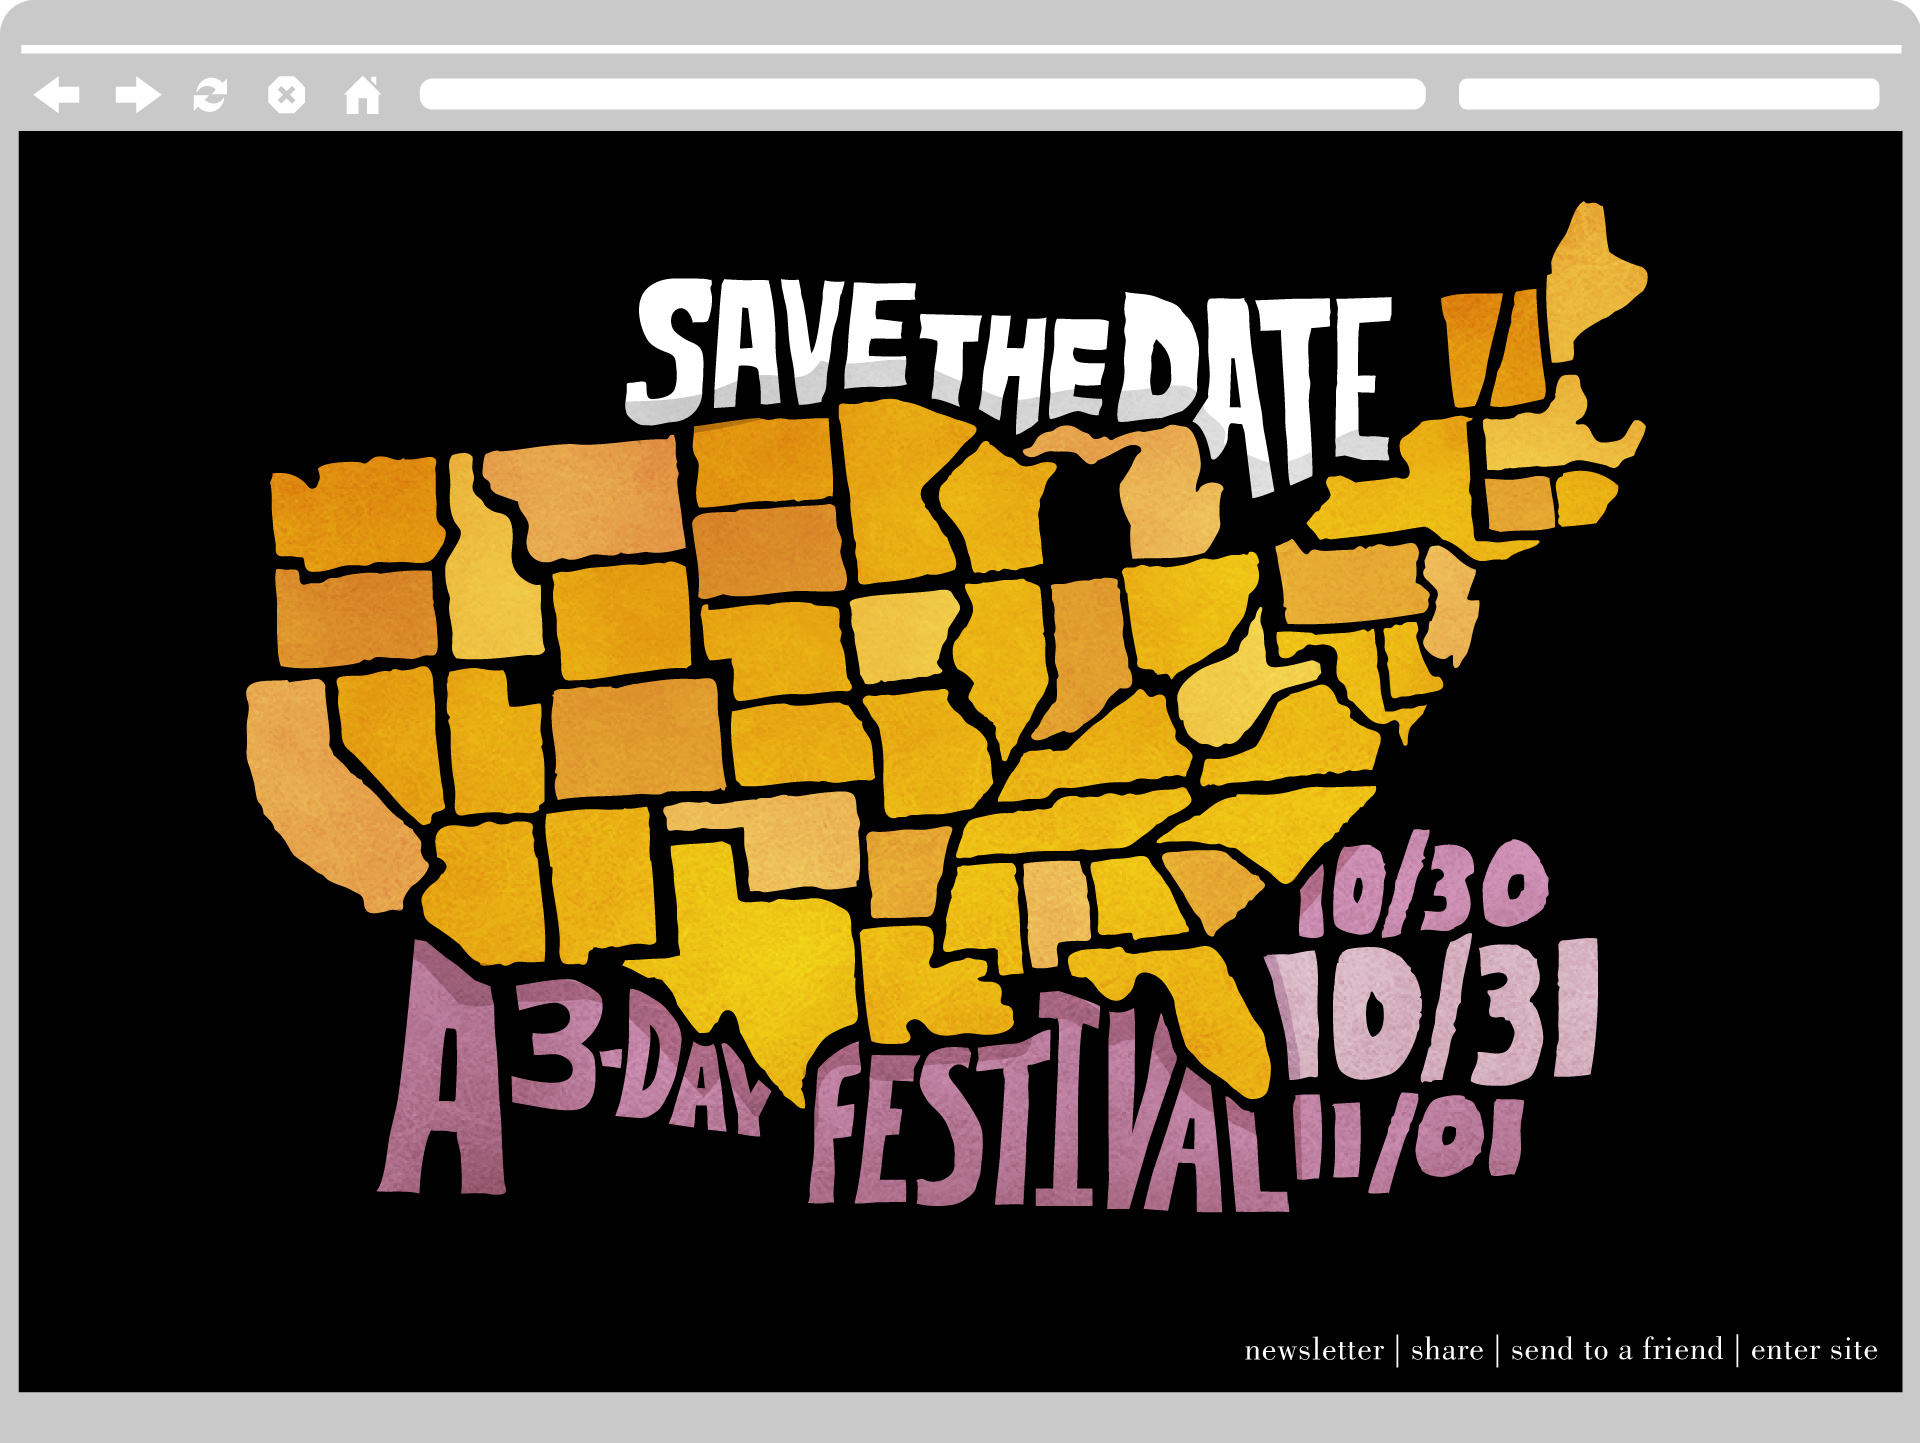  Splash page before any states were removed. 